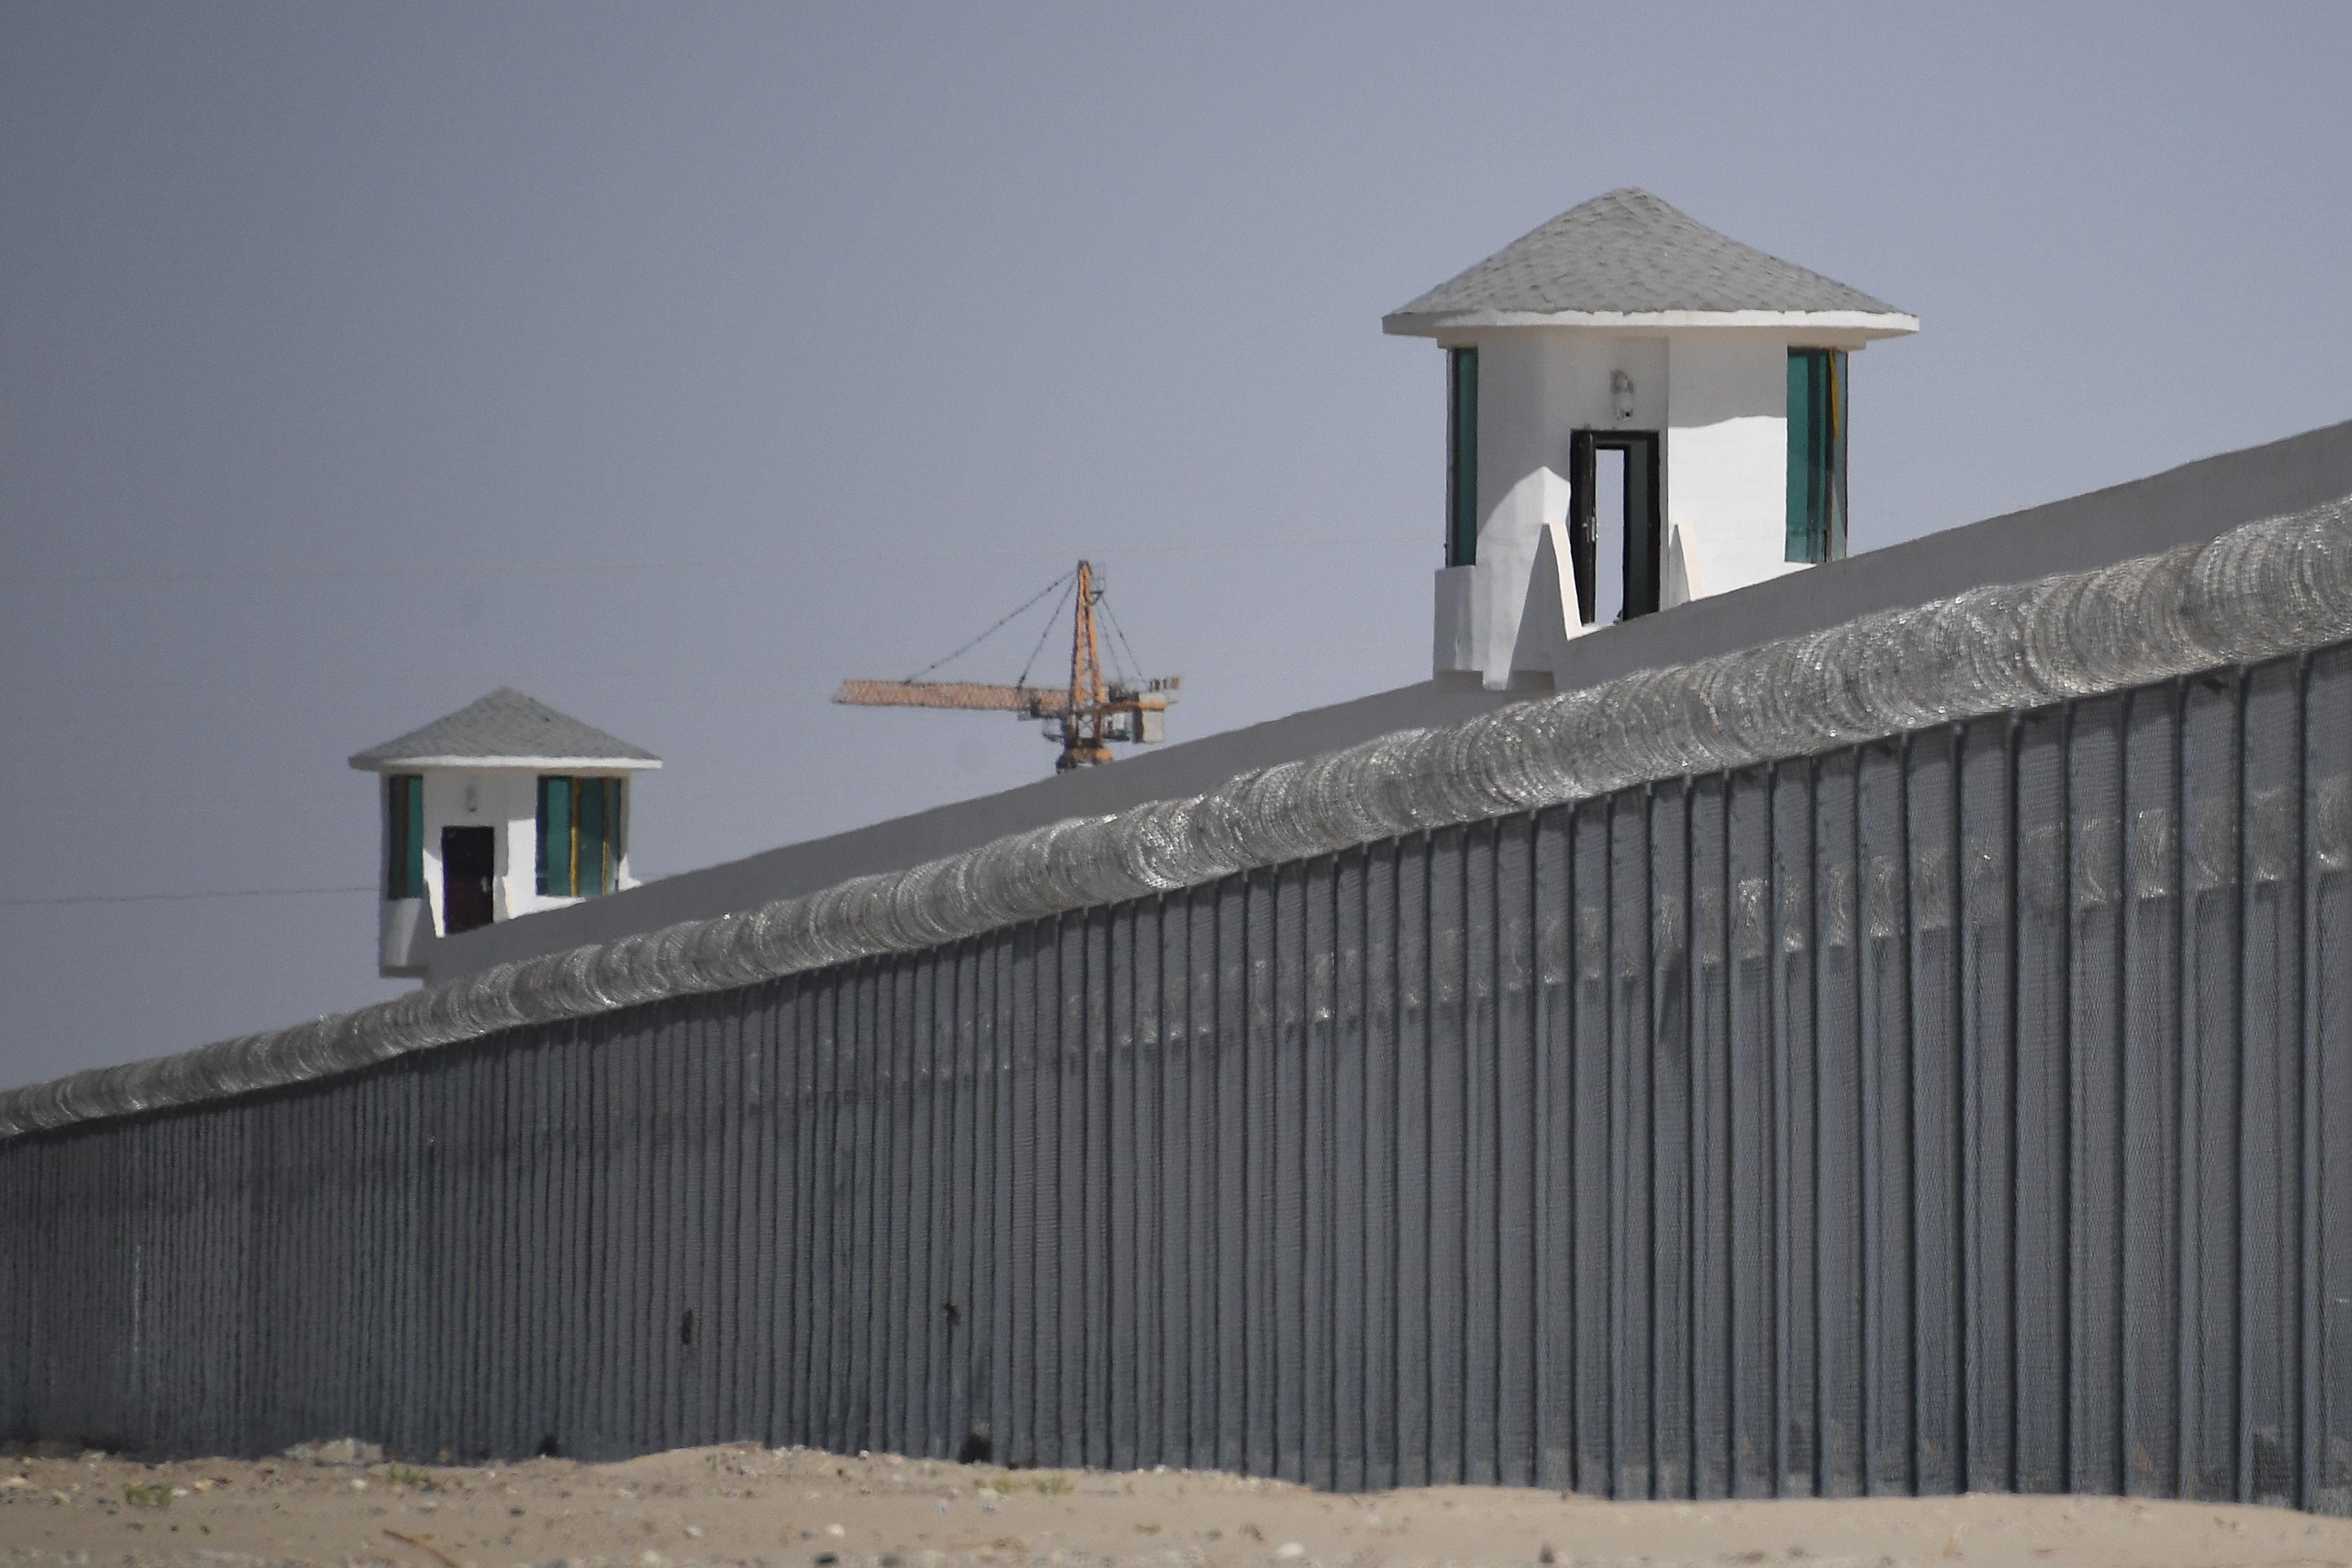 This photo taken on May 31, 2019 shows watchtowers on a high-security facility near what is believed to be a re-education camp where mostly Muslim ethnic minorities are detained, on the outskirts of Hotan, in China's northwestern Xinjiang region. - As many as one million ethnic Uighurs and other mostly Muslim minorities are believed to be held in a network of internment camps in Xinjiang, but China has not given any figures and describes the facilities as "vocational education centres" aimed at steering people away from extremism. (Photo by GREG BAKER / AFP) / TO GO WITH AFP STORY CHINA-XINJIANG-MEDIA-RIGHTS-PRESS,FOCUS BY EVA XIAO (Photo credit should read GREG BAKER/AFP via Getty Images)